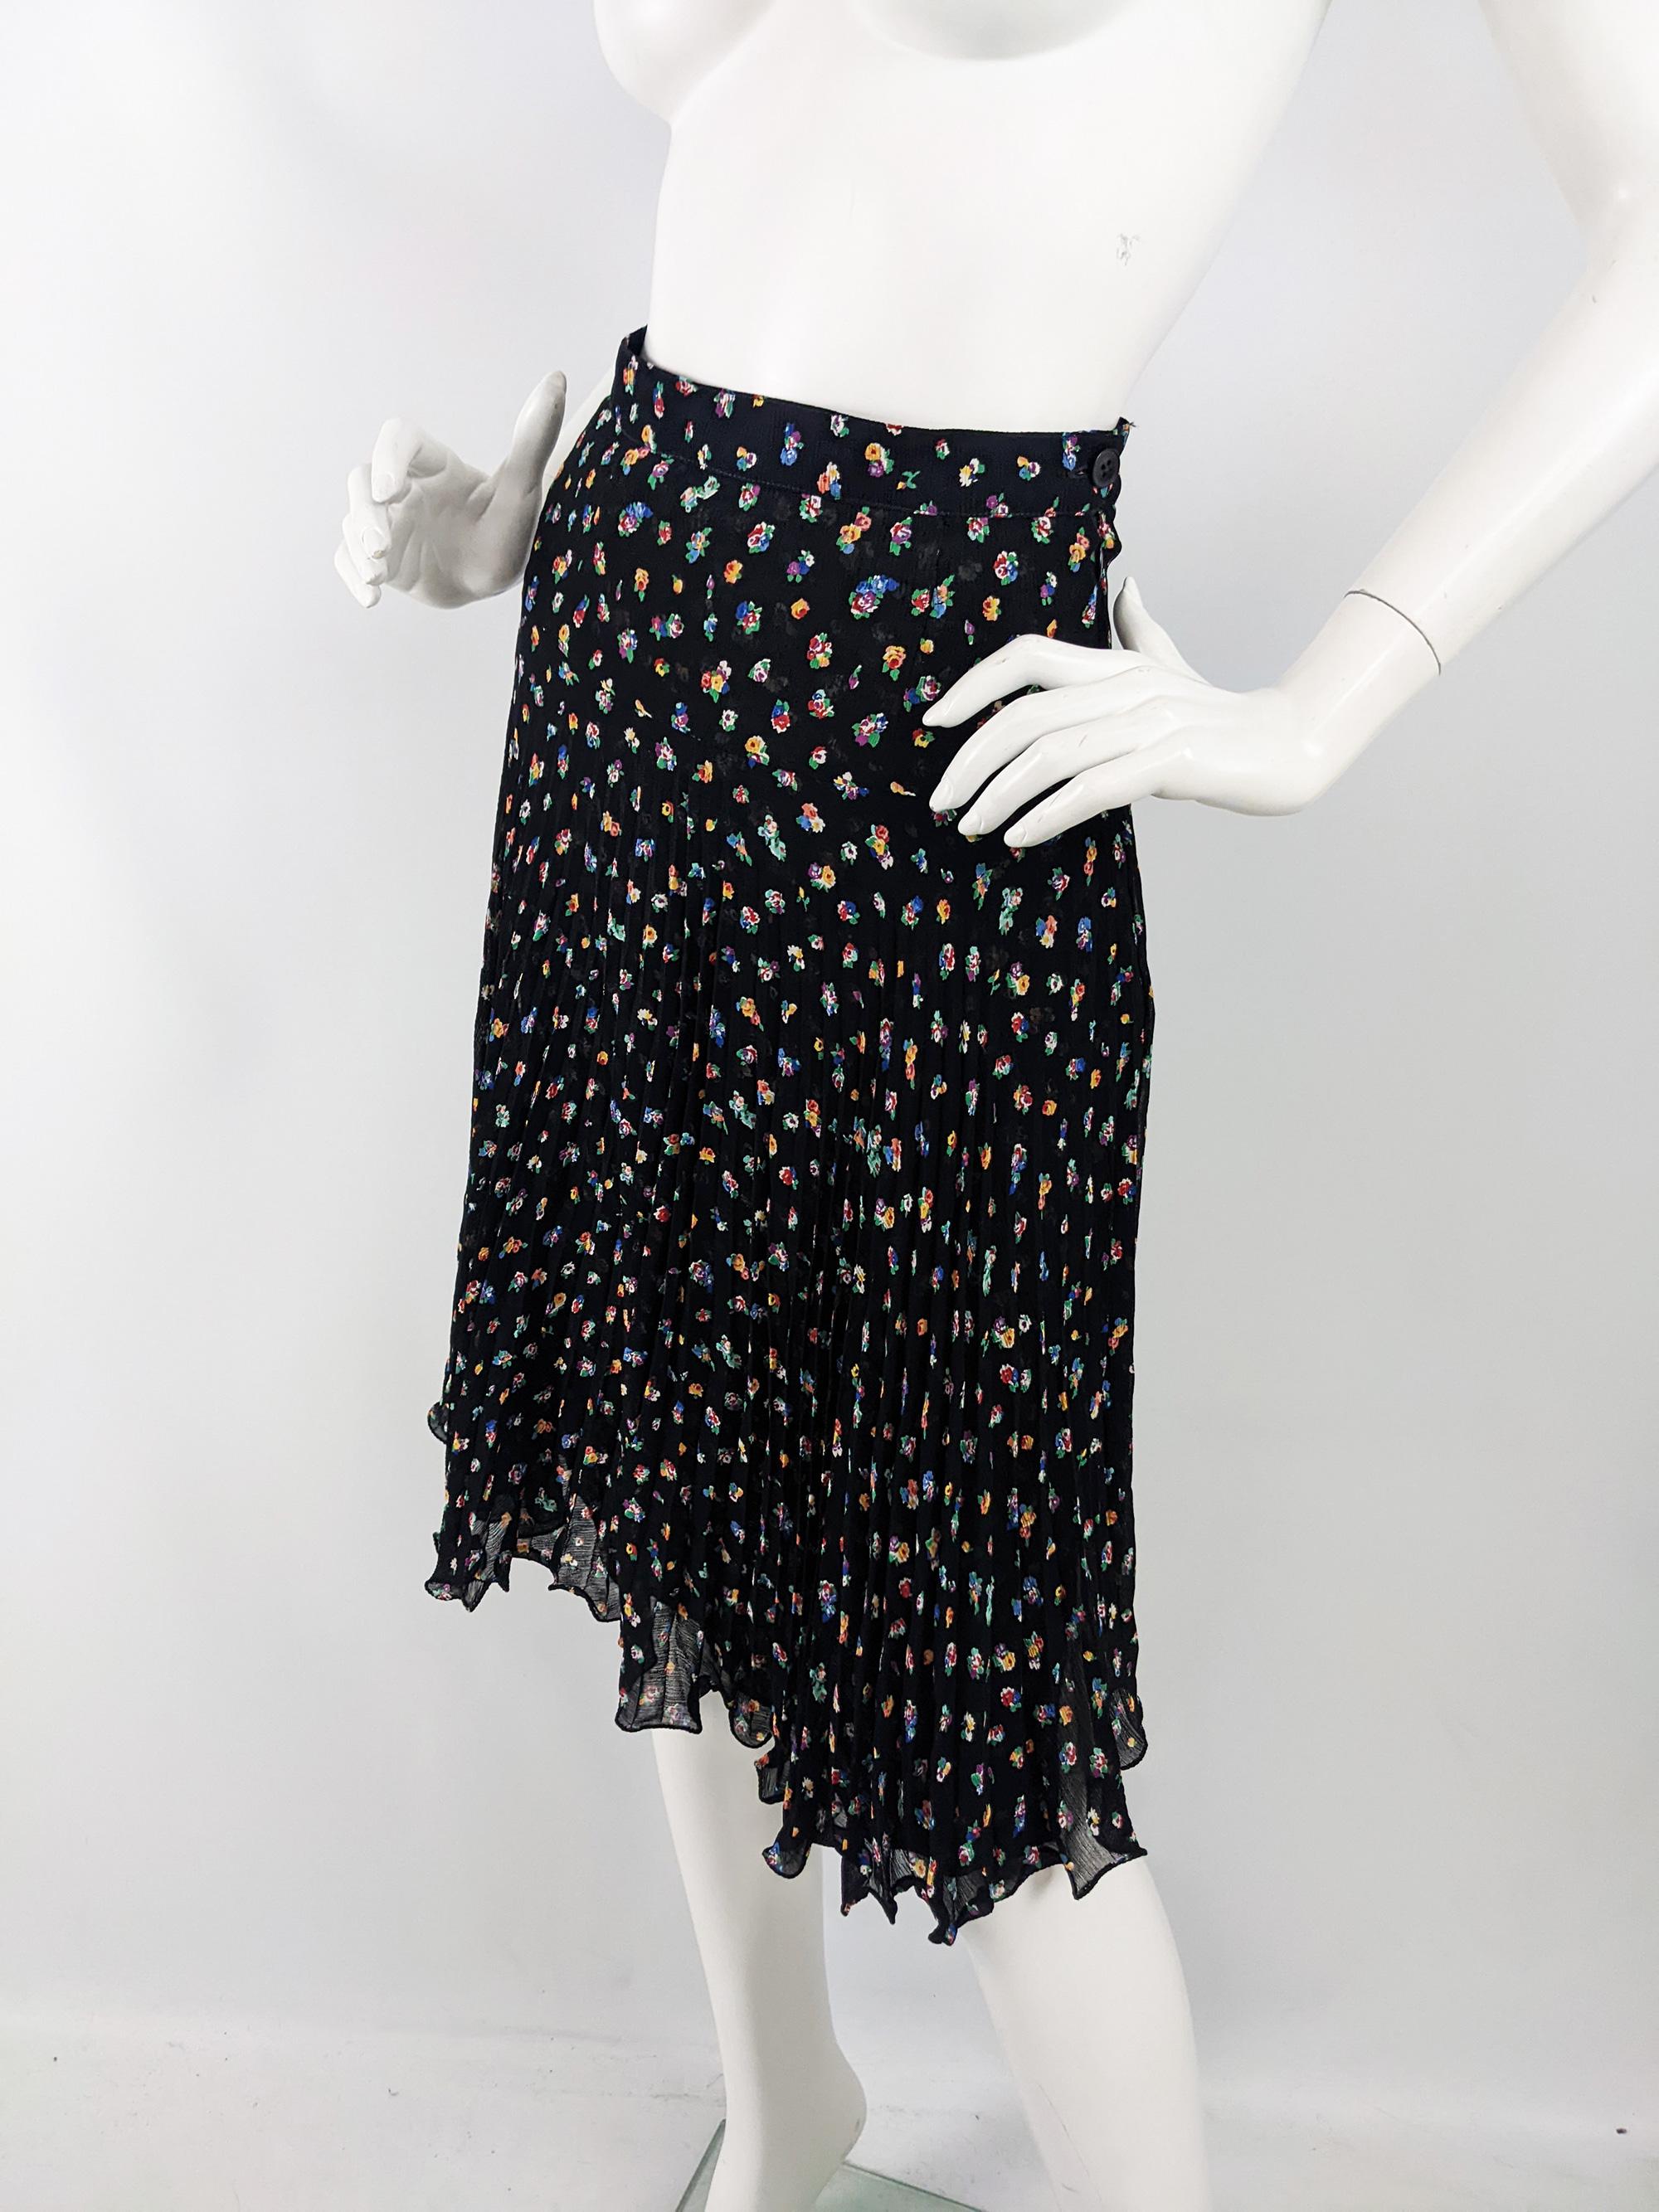 Mariella Burani Vintage Floral Print Pleated Black Chiffon Skirt, 1990s In Excellent Condition For Sale In Doncaster, South Yorkshire